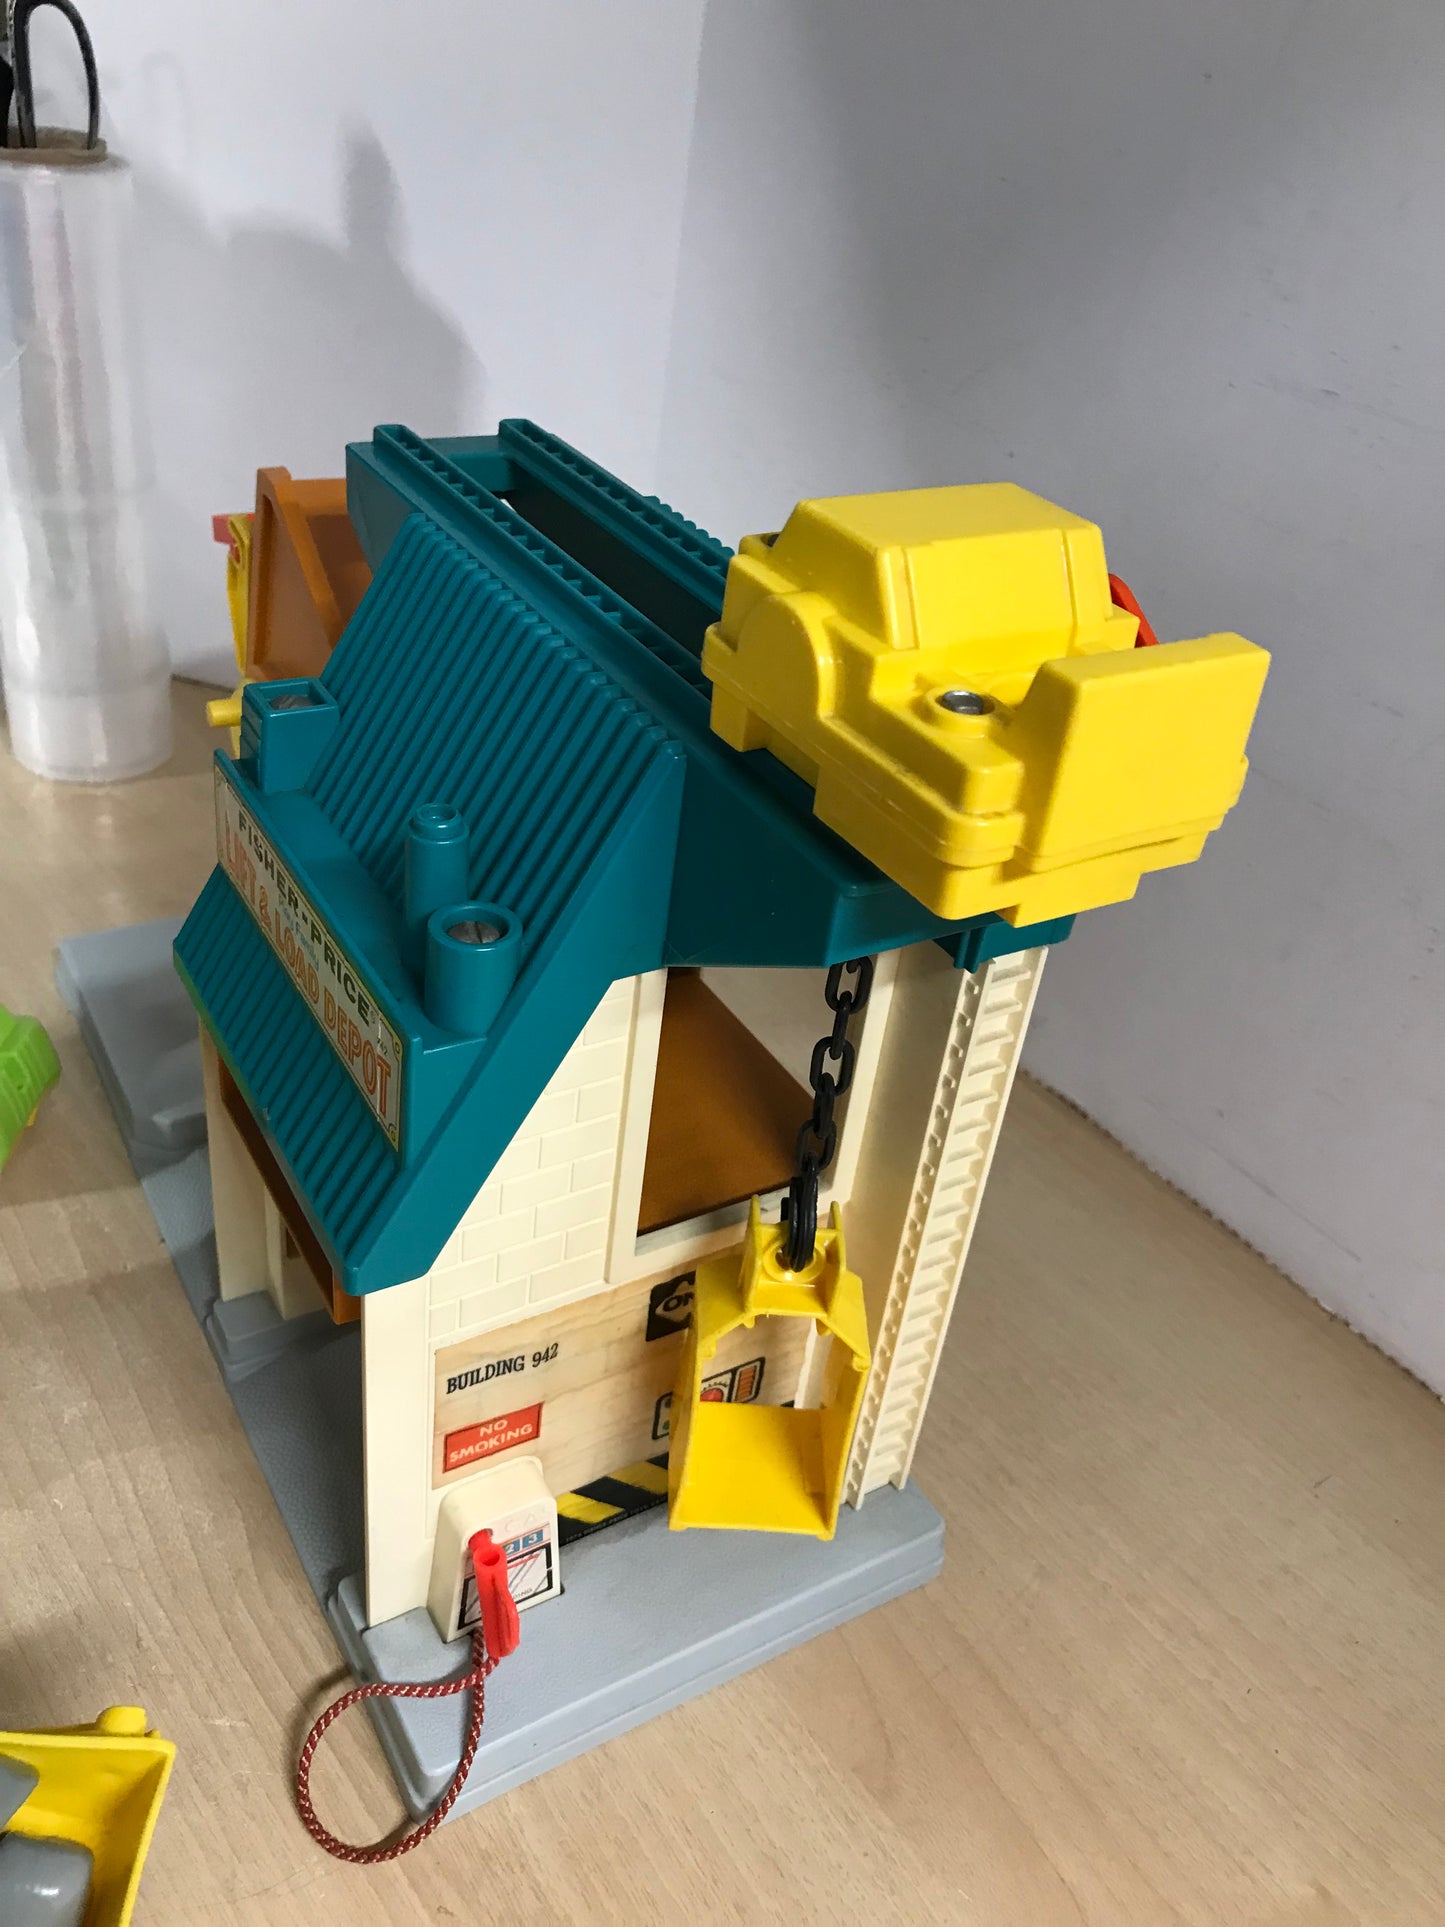 Fisher Price Vintage Little People 1977 Play Family Lift Load Construction Depot With Loading Hook and Lift RARE